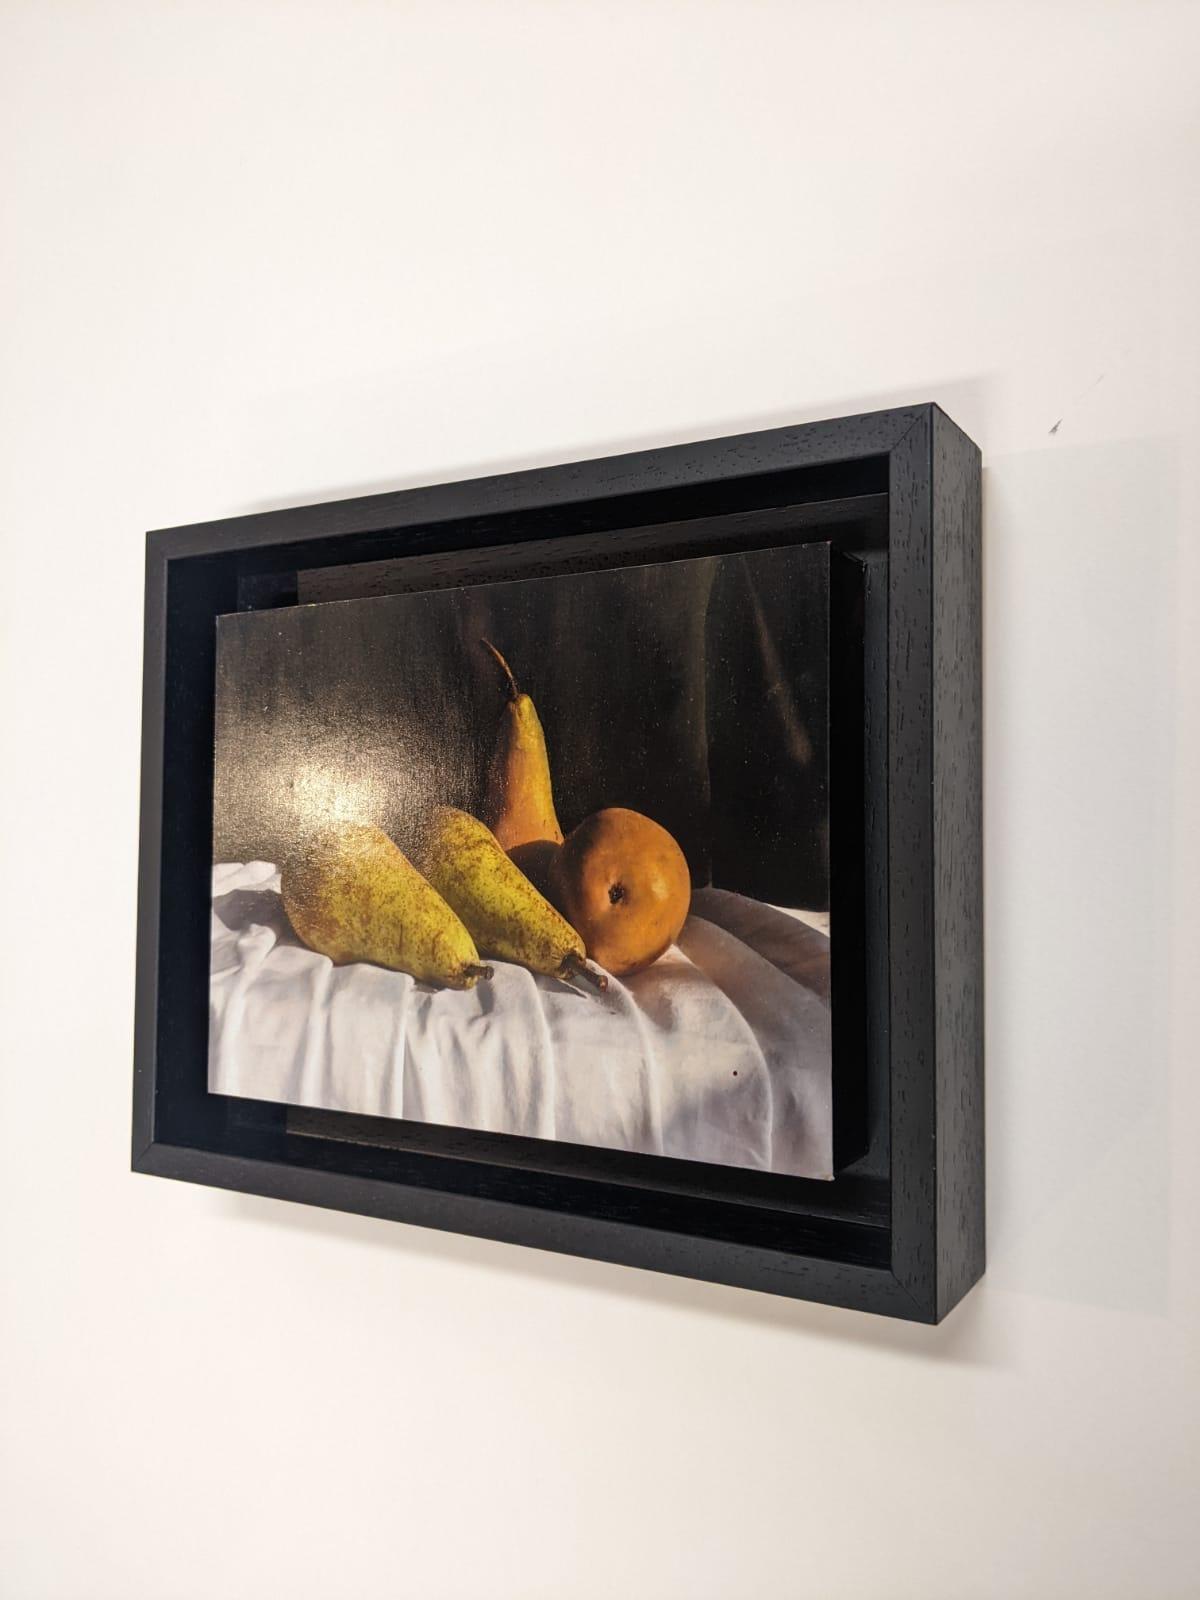 Conference Pears, Kate Verrion, Still life painting, Oil painting, 2022 3